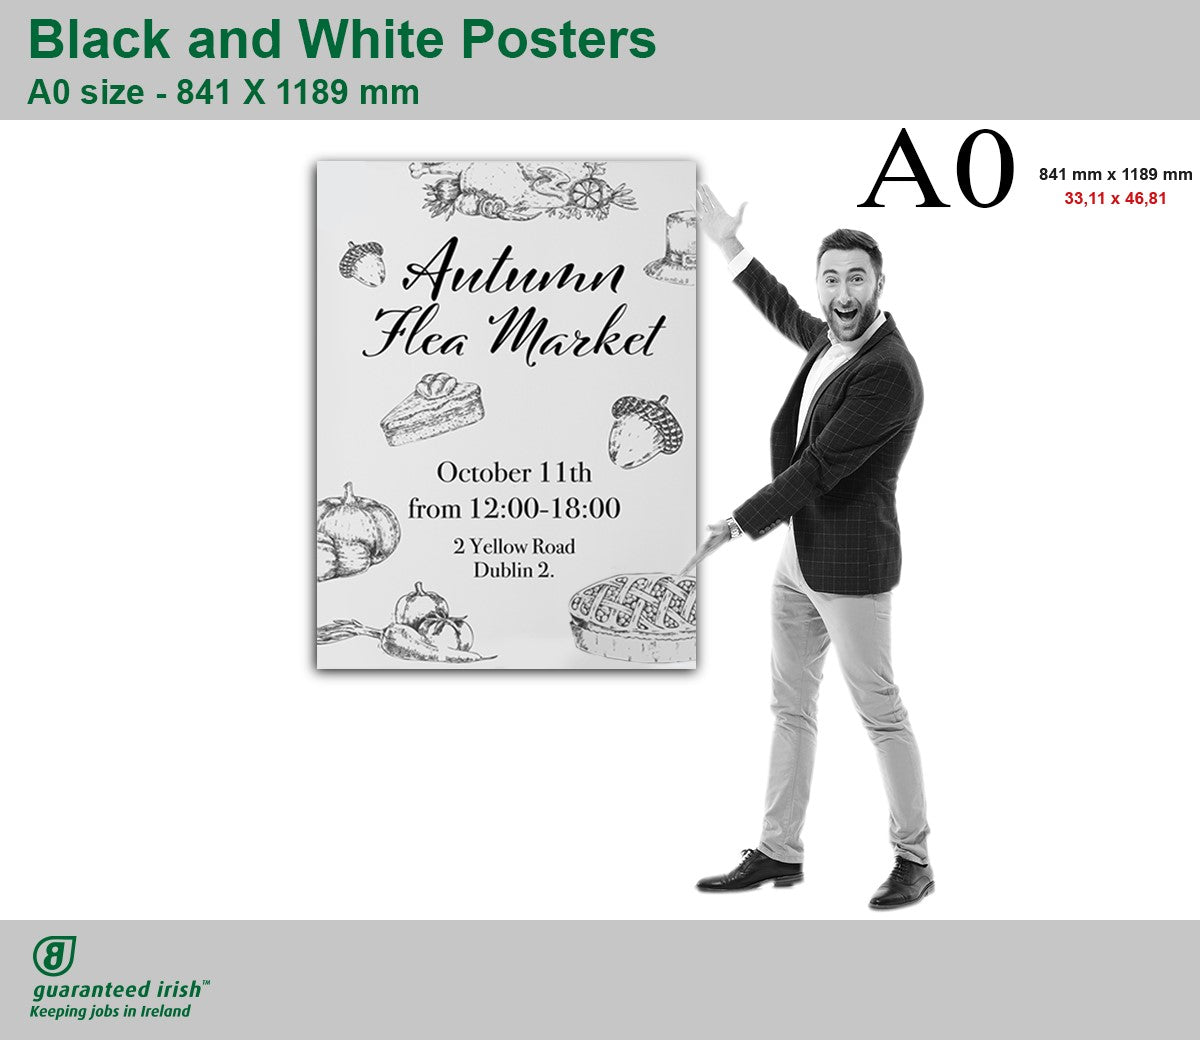 Black and White Posters A0